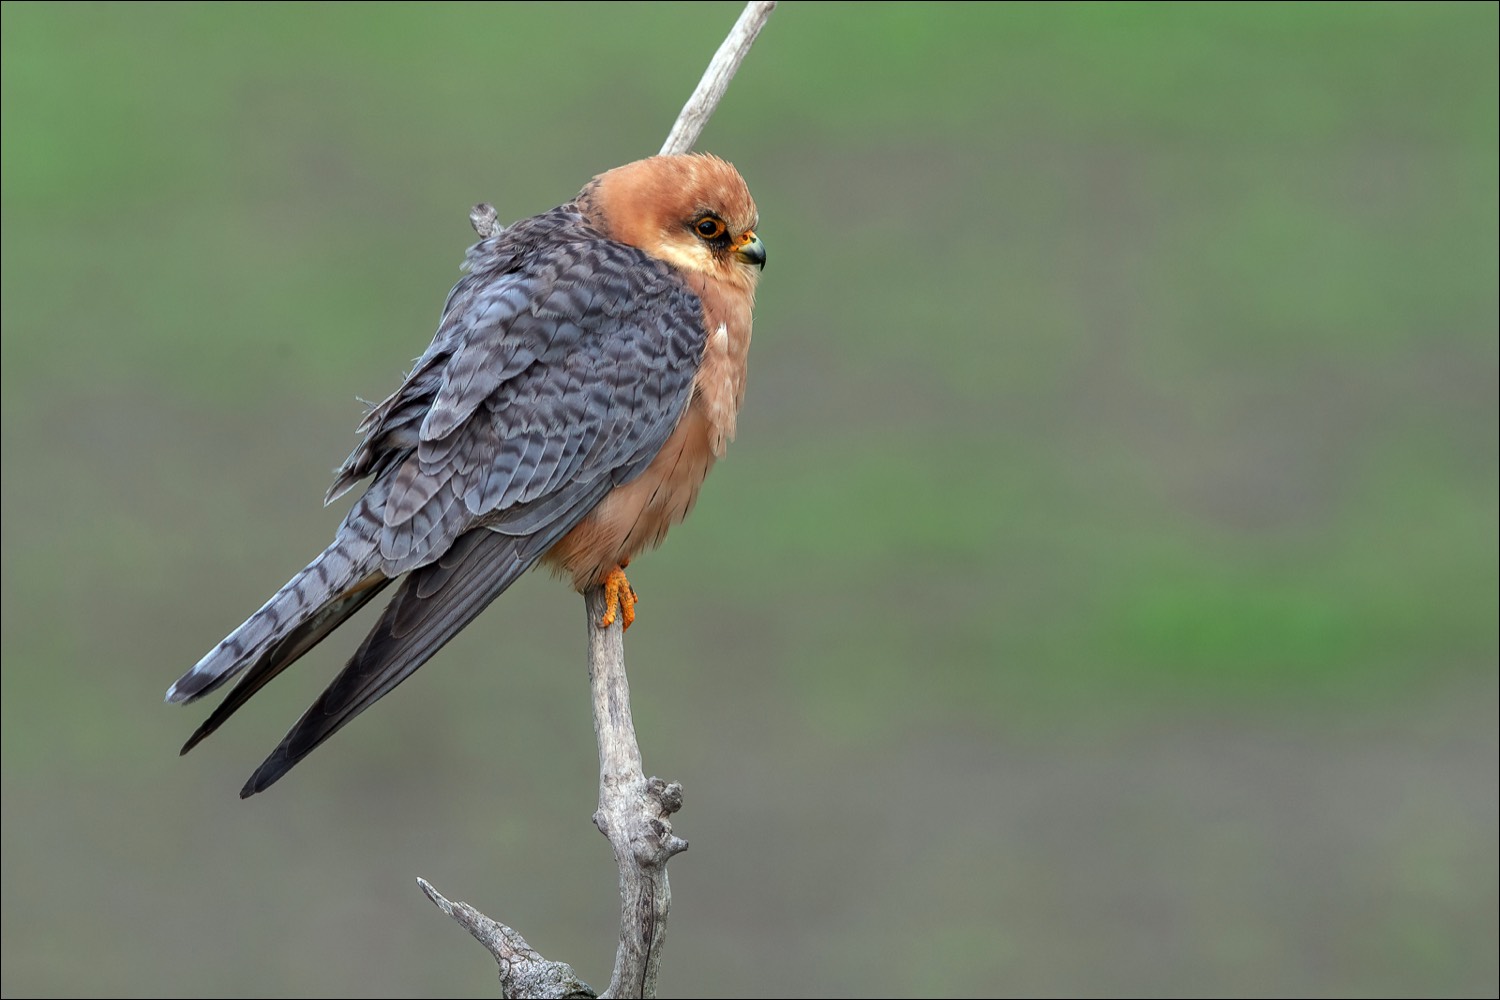 Red-footed falcon (Roodpootvalk)